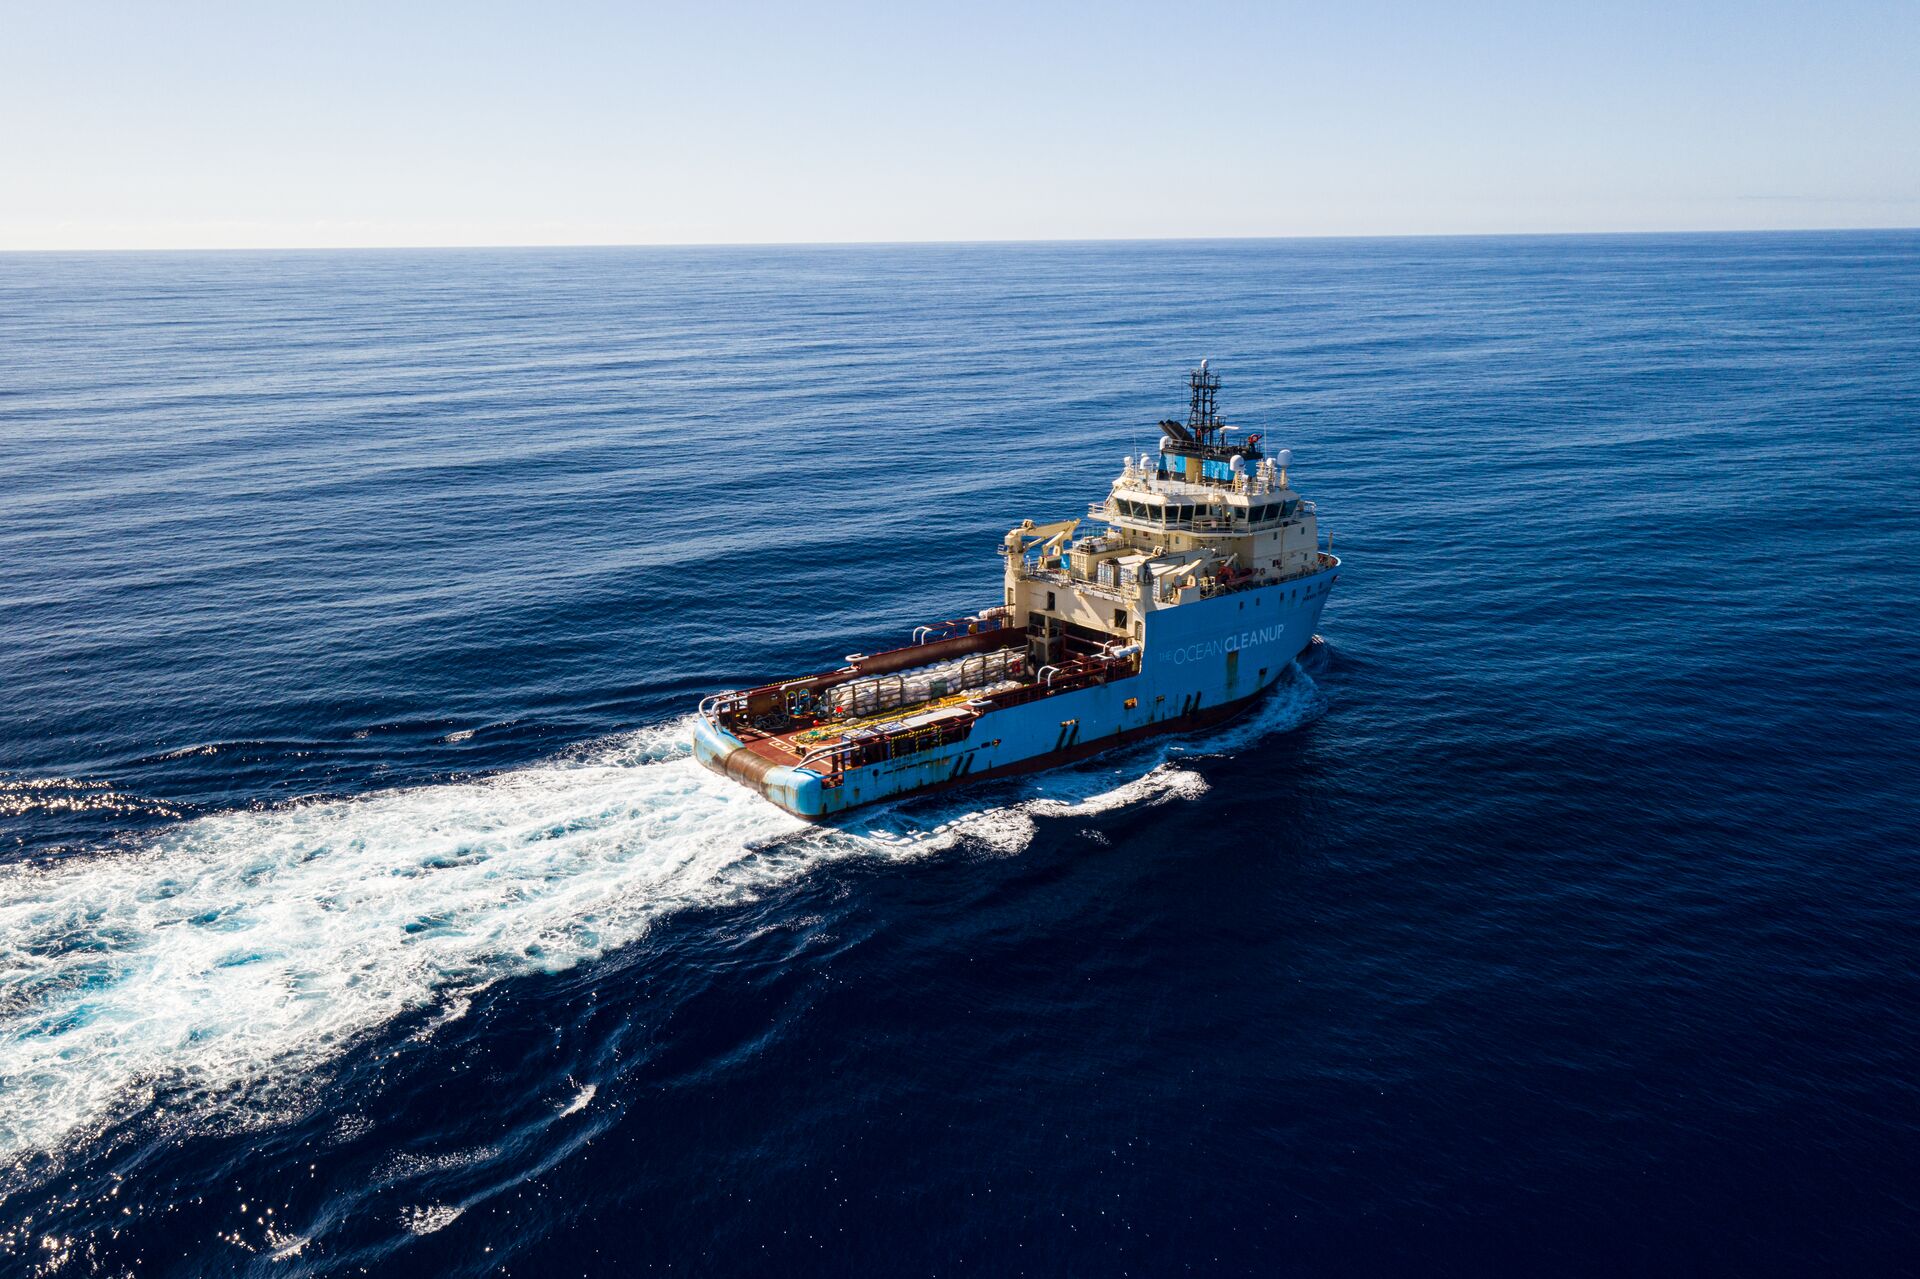 Maersk Tender sets off to launch Biofuel Trial